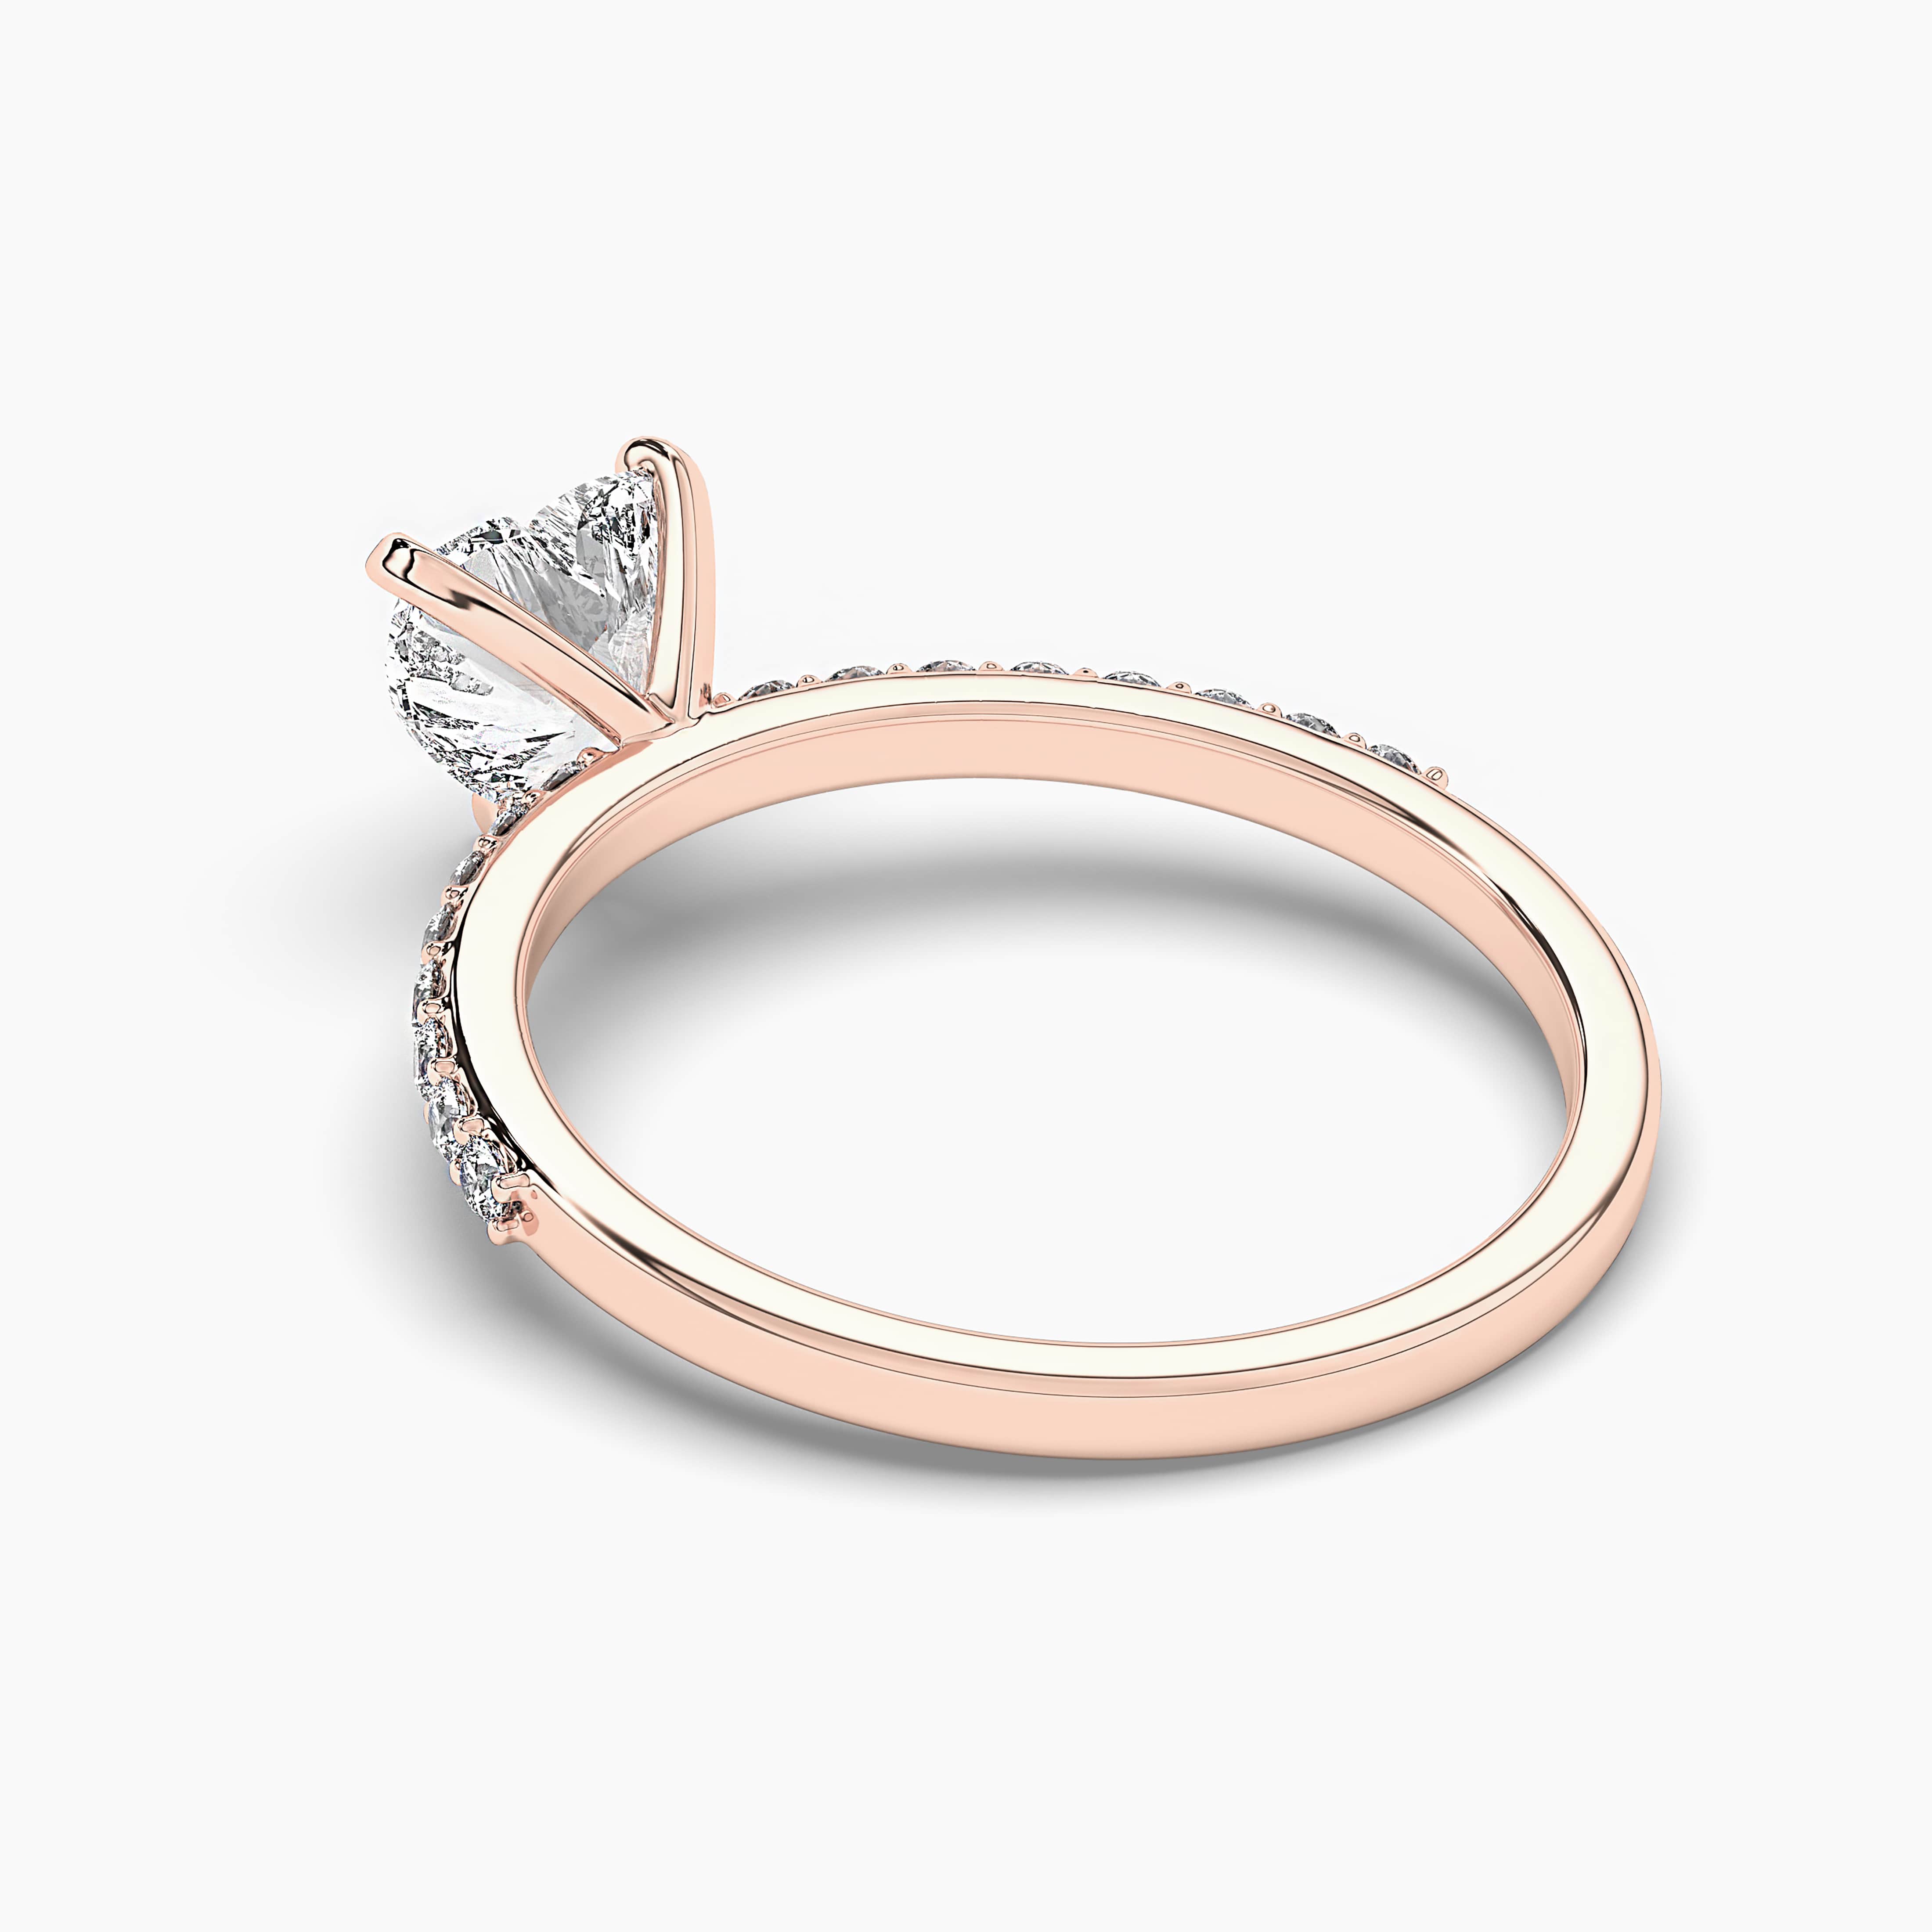 Heart Cut Diamond Ring with Gold Latest 